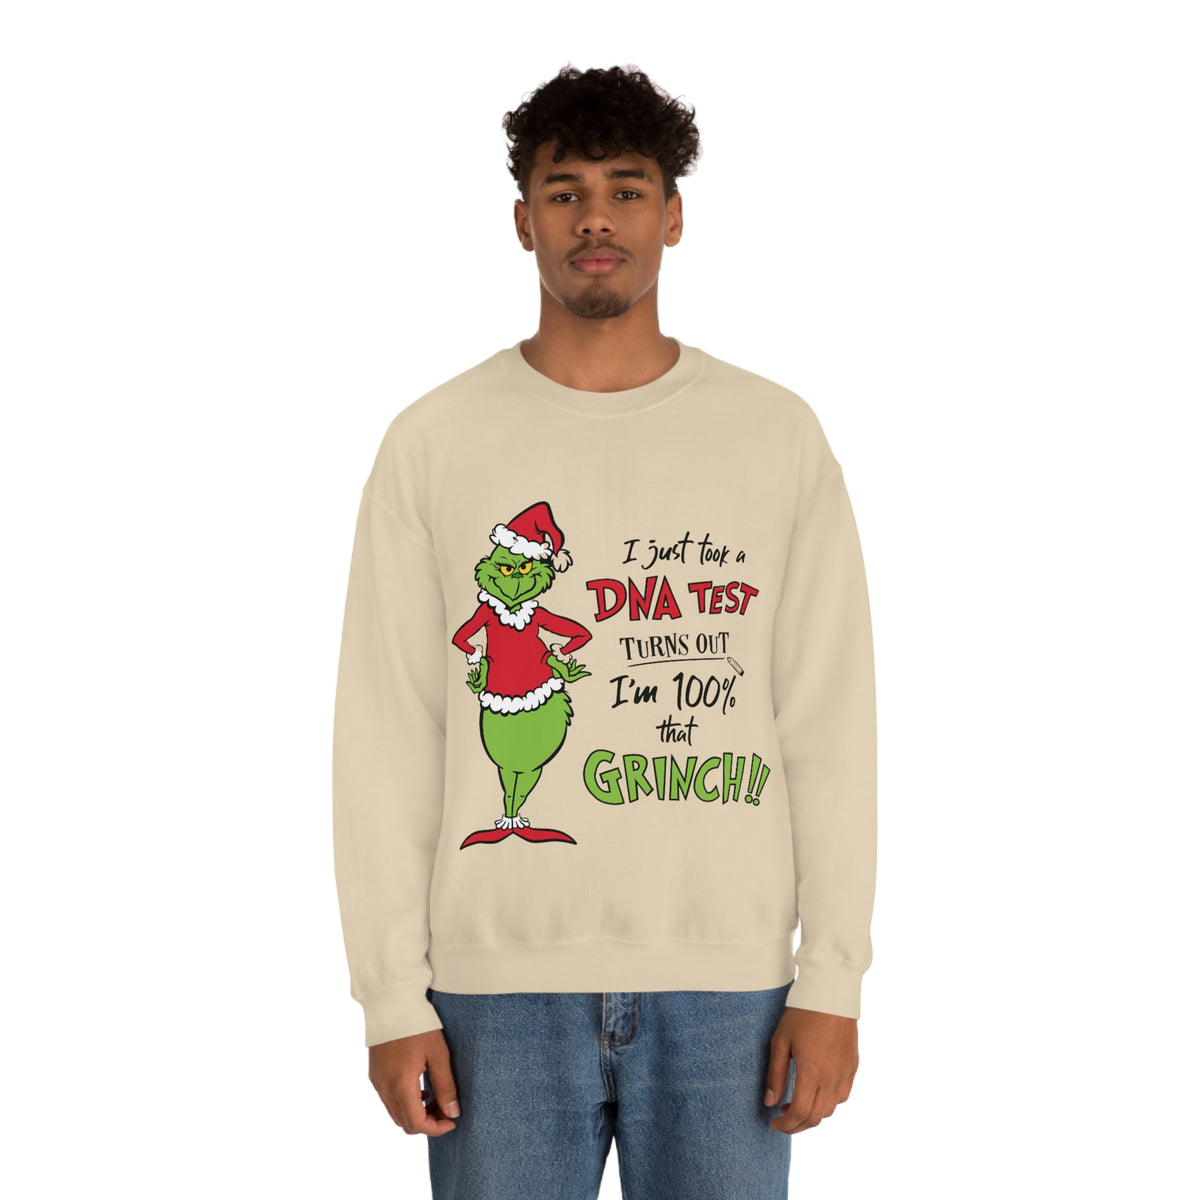 The Grinch Humor Crewneck, I'm 100% That Grinch, Lizzo Funny Christmas Pullover, The Grinch Holiday Sweatshirt